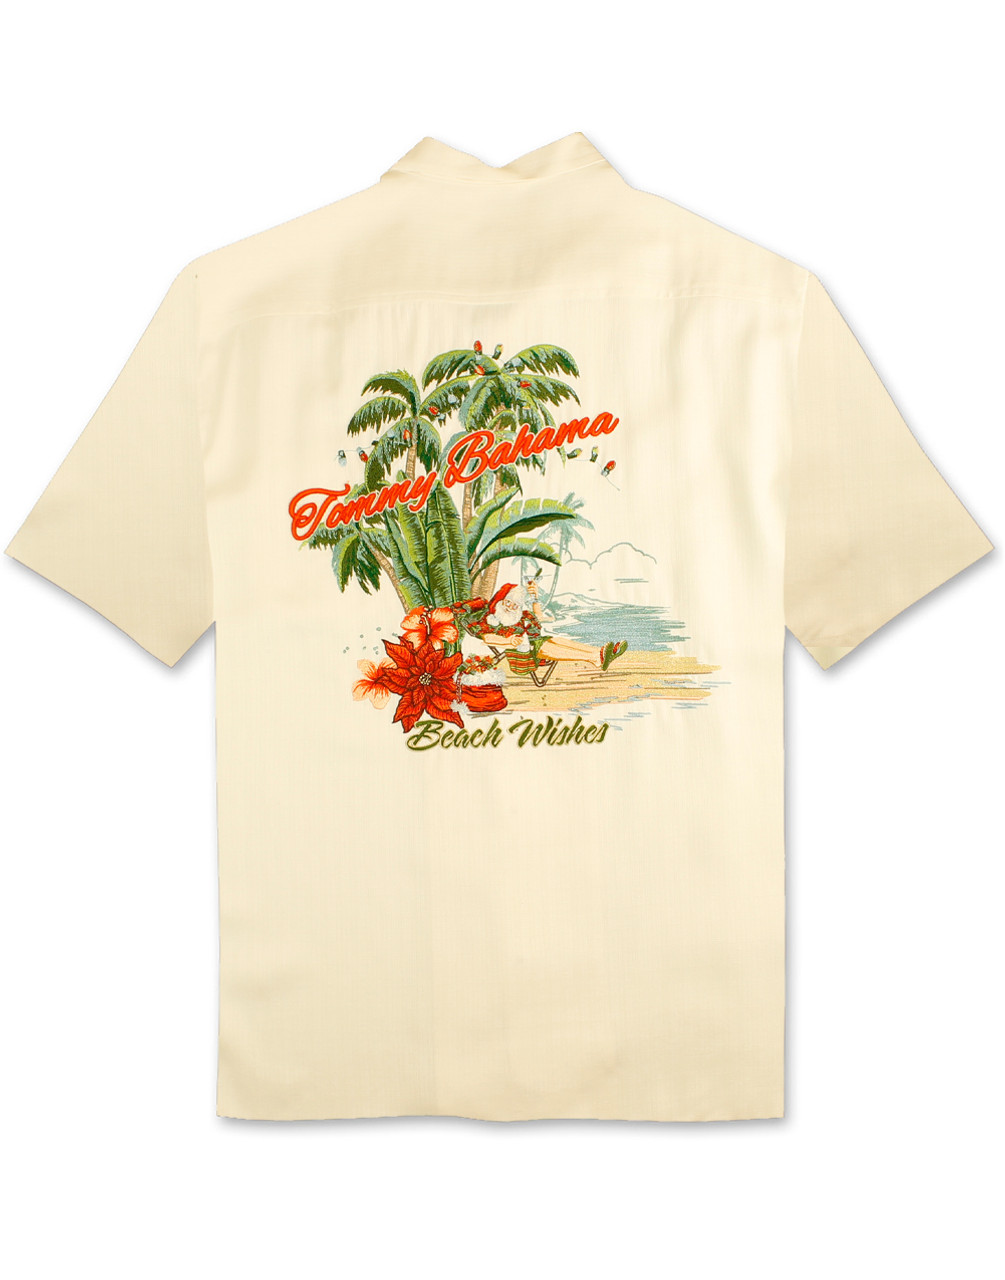 Beach Wishes Christmas Shirt by Tommy Bahama